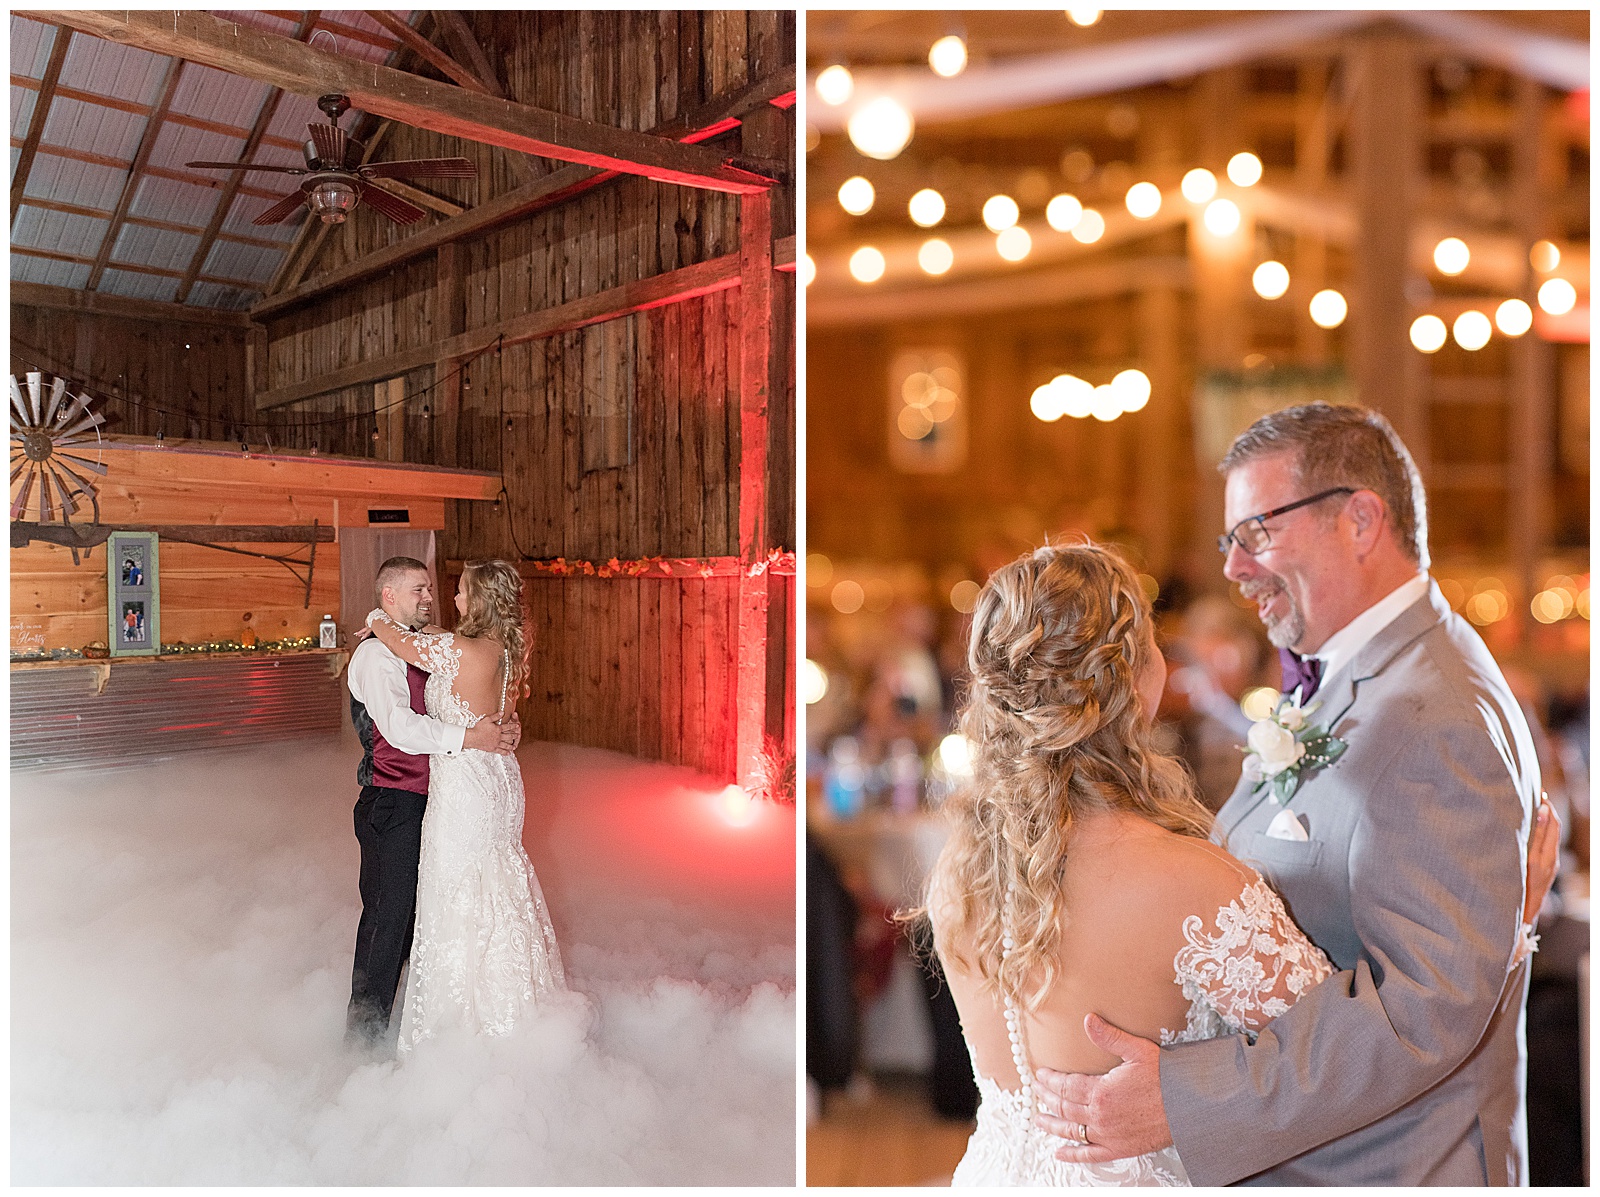 bride and groom sharing their first dance at barn wedding reception with smoke at their feet